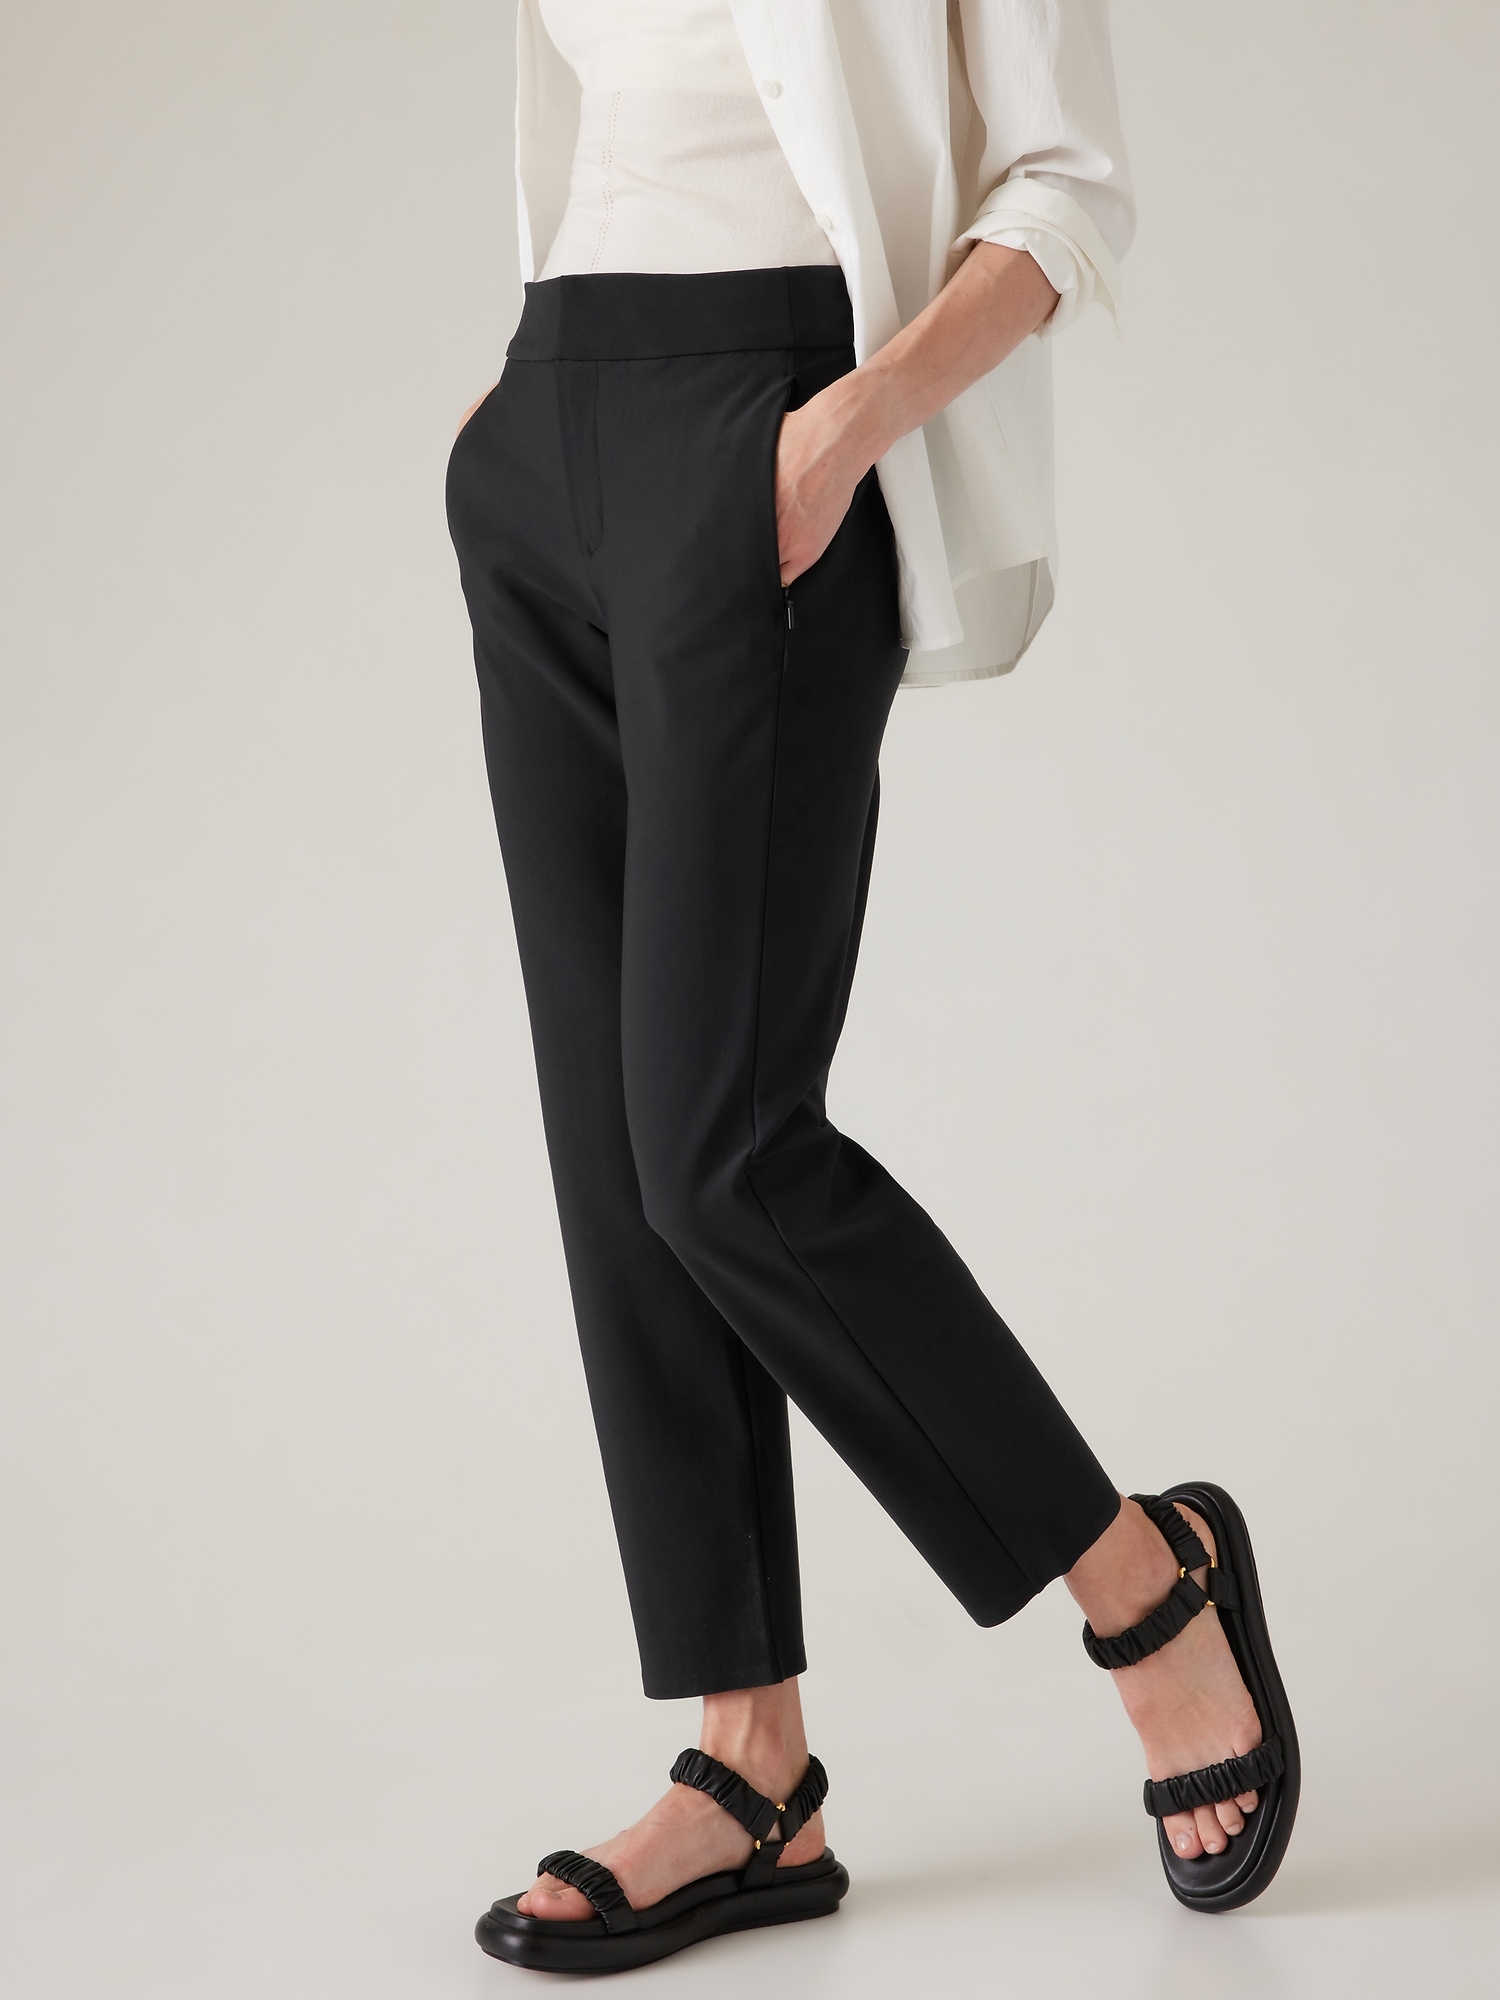 Athleta Solid Black Casual Pants Size 6 (Tall) - 66% off